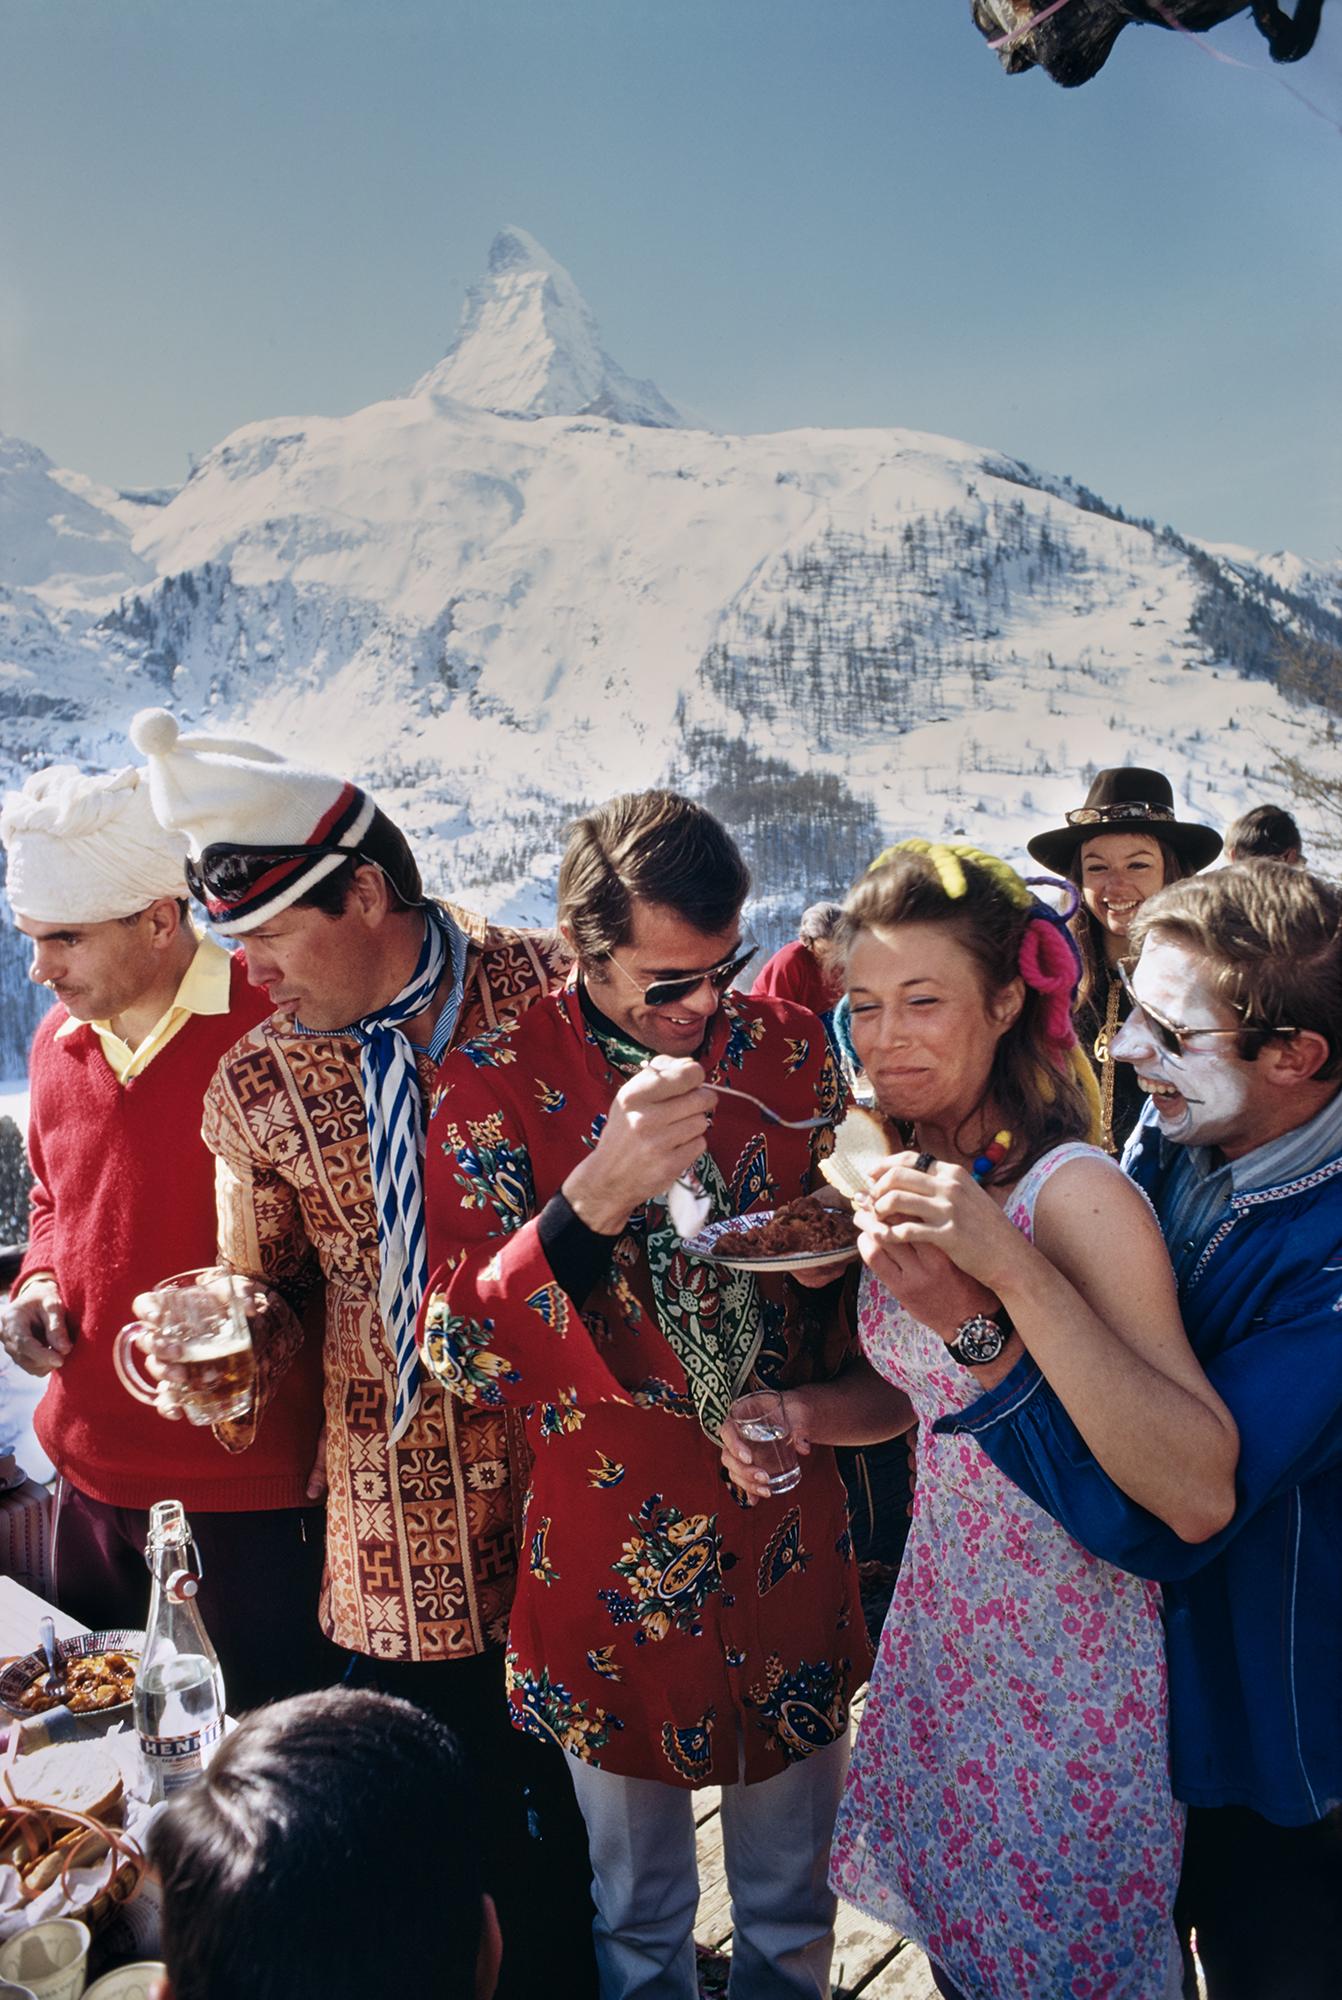 Slim Aarons
Zermatt Skiing
1968
C print
Estate stamped and hand numbered edition of 150 with certificate of authenticity from the estate.   

The apres-ski in Zermatt, Switzerland, March 1968. 
(Photo by Slim Aarons/Hulton Archive/Getty